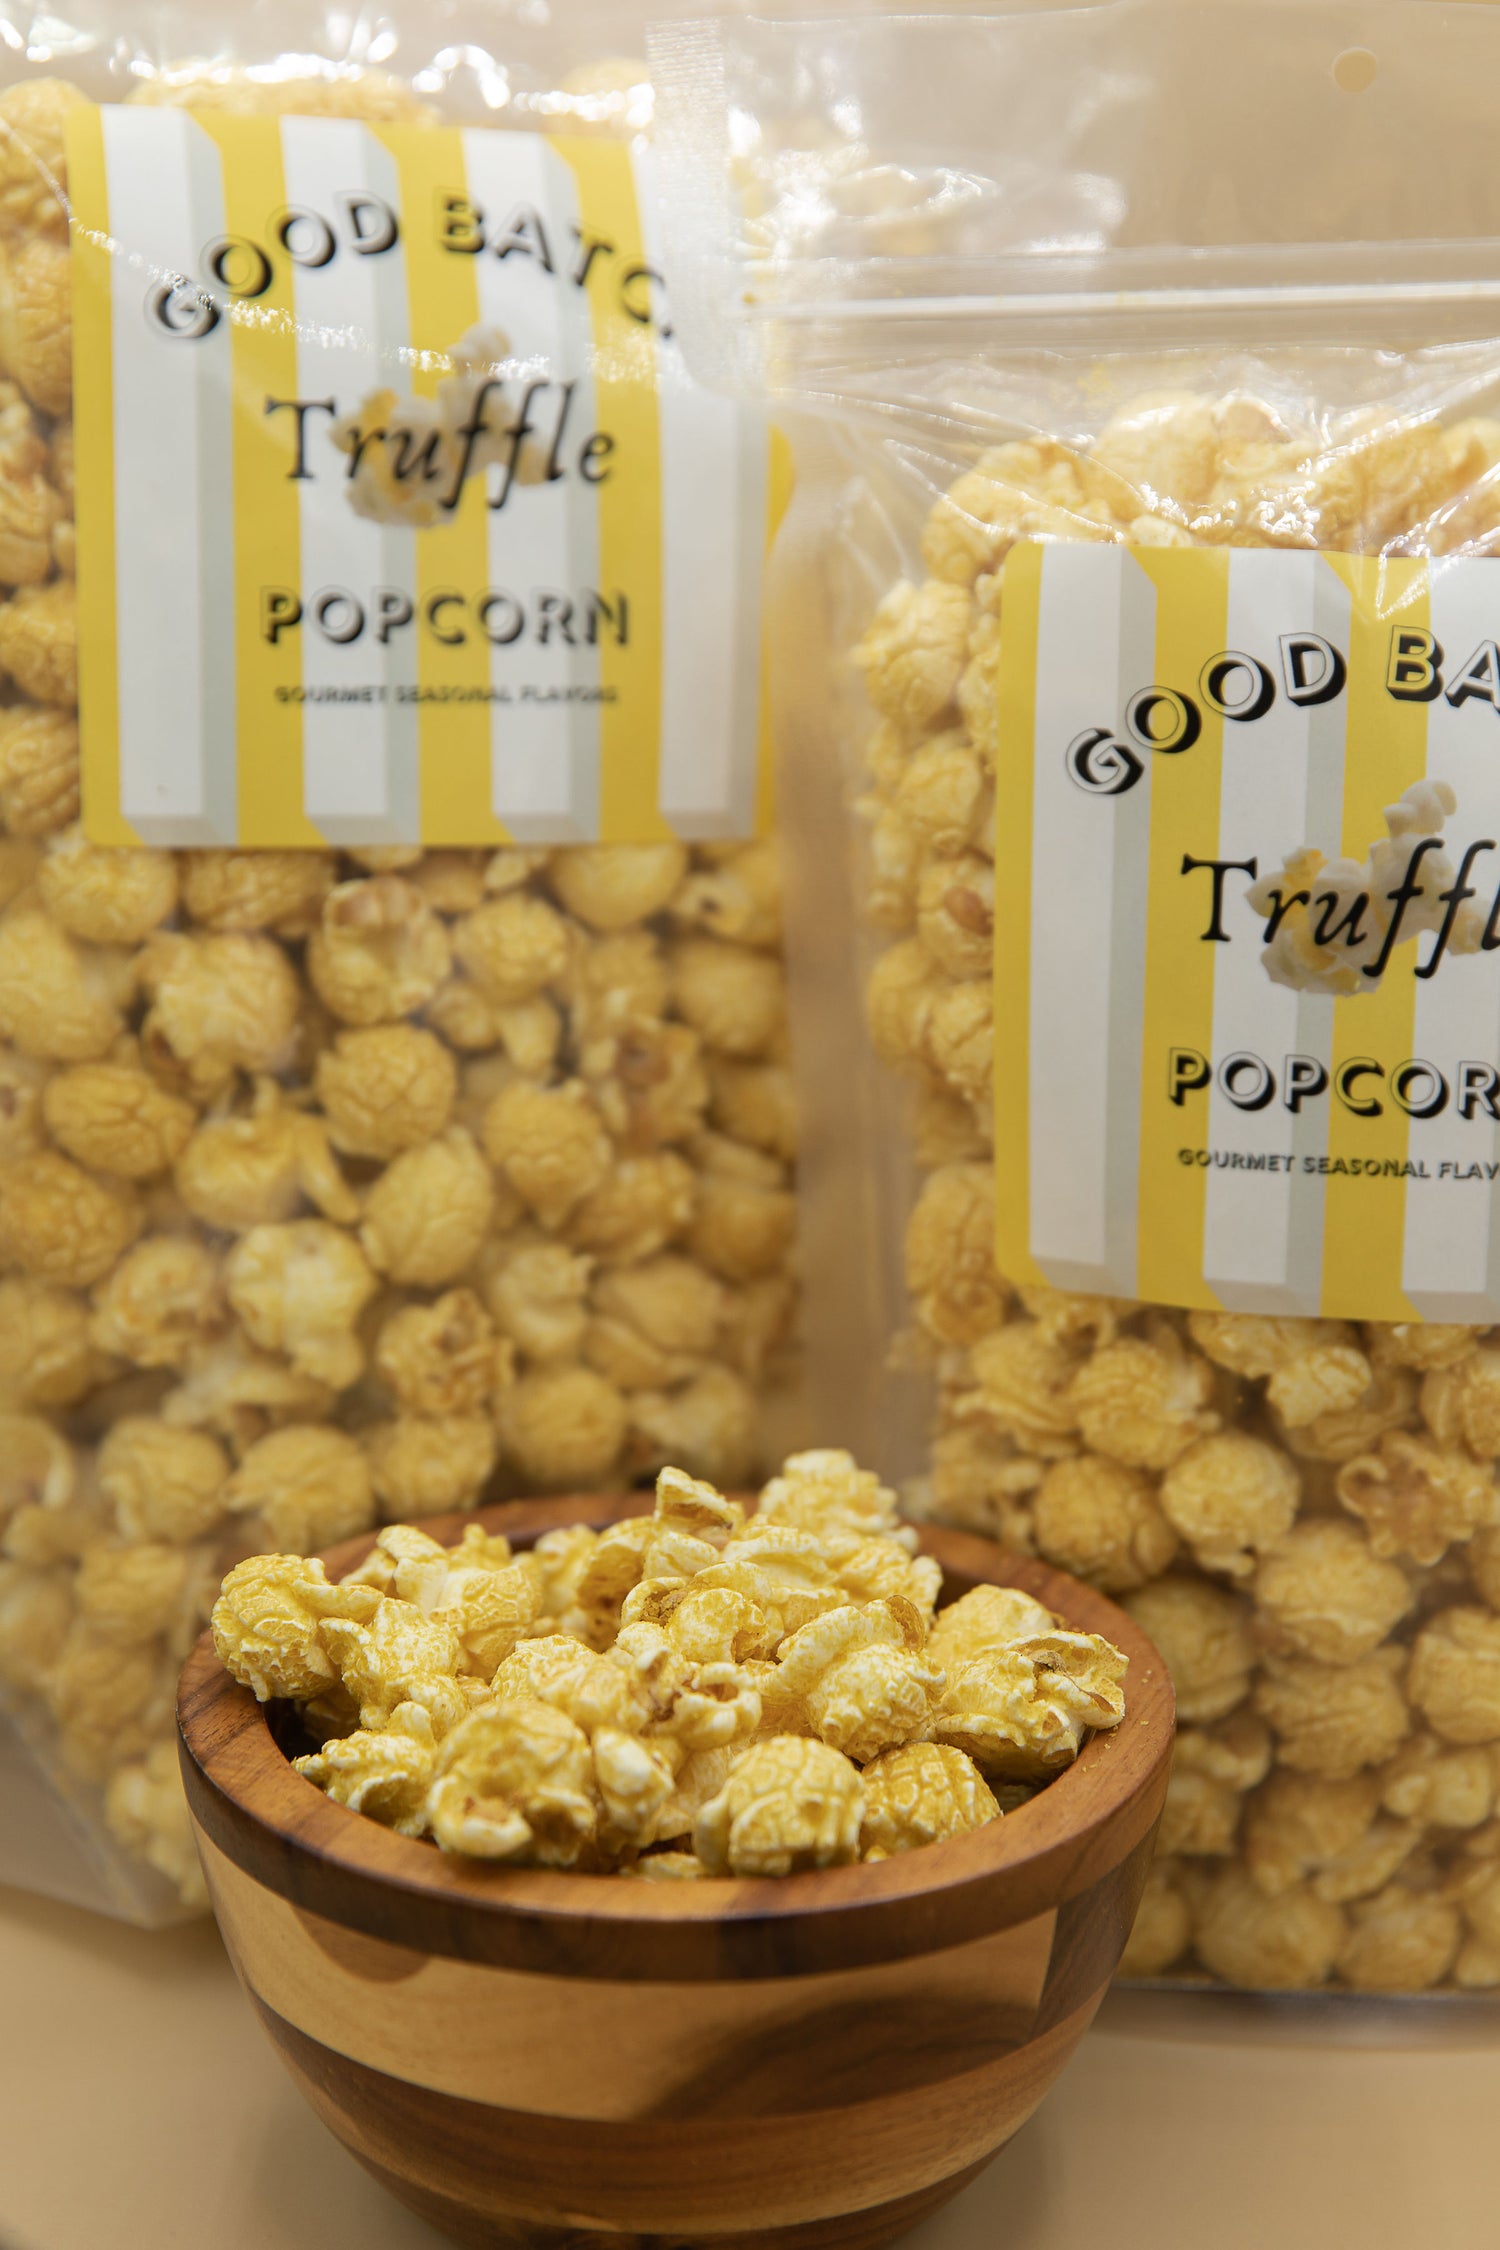 Our rich, intense, signature flavor is pictured. Truffle Popcorn